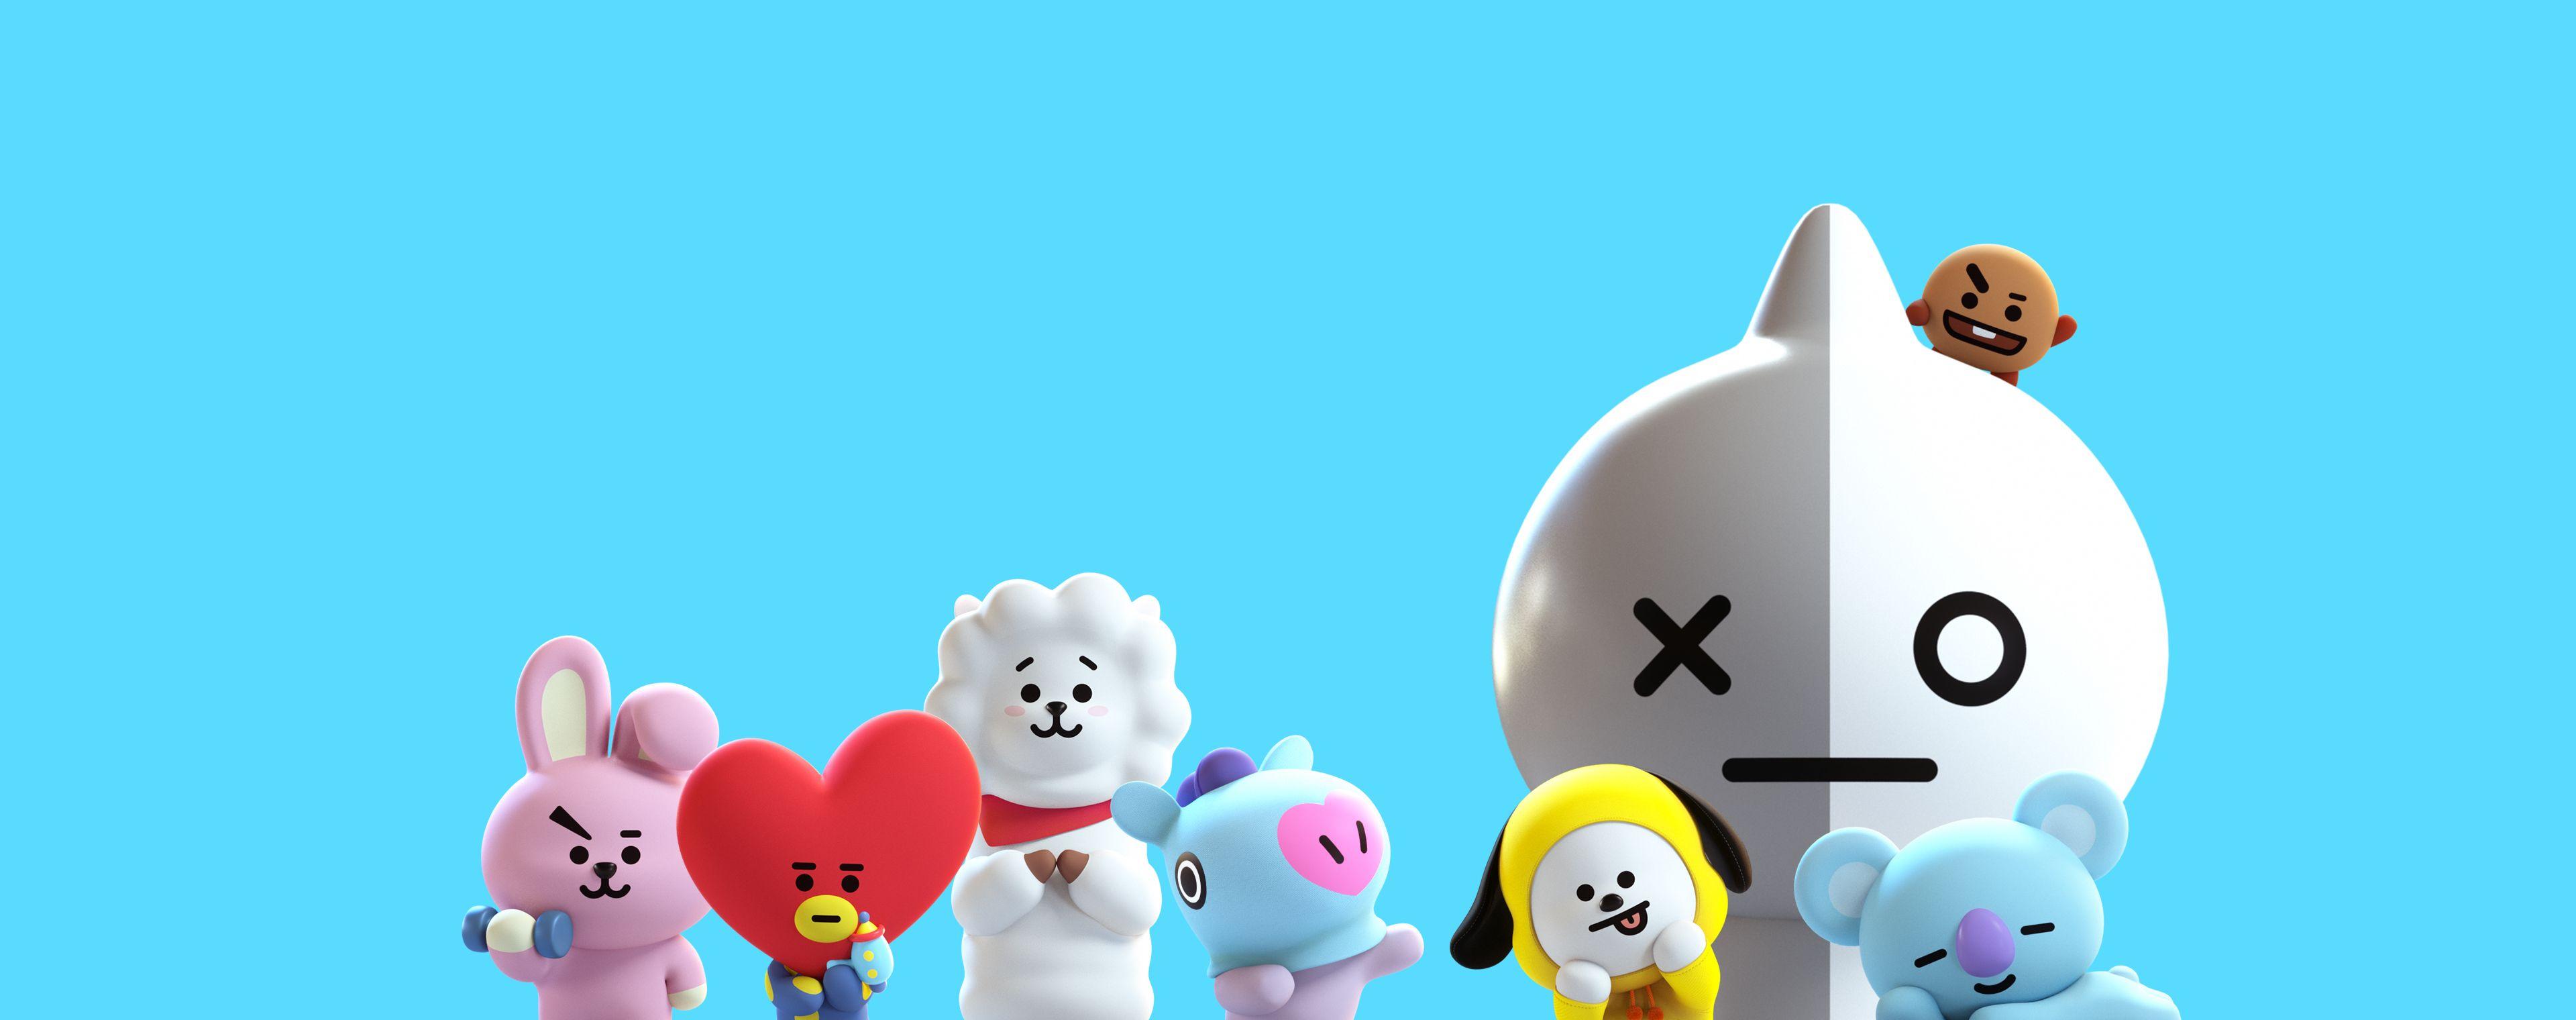 Bt21 Laptop Wallpapers Wallpaper Cave Wallpapers available in hd and 4k quality. bt21 laptop wallpapers wallpaper cave